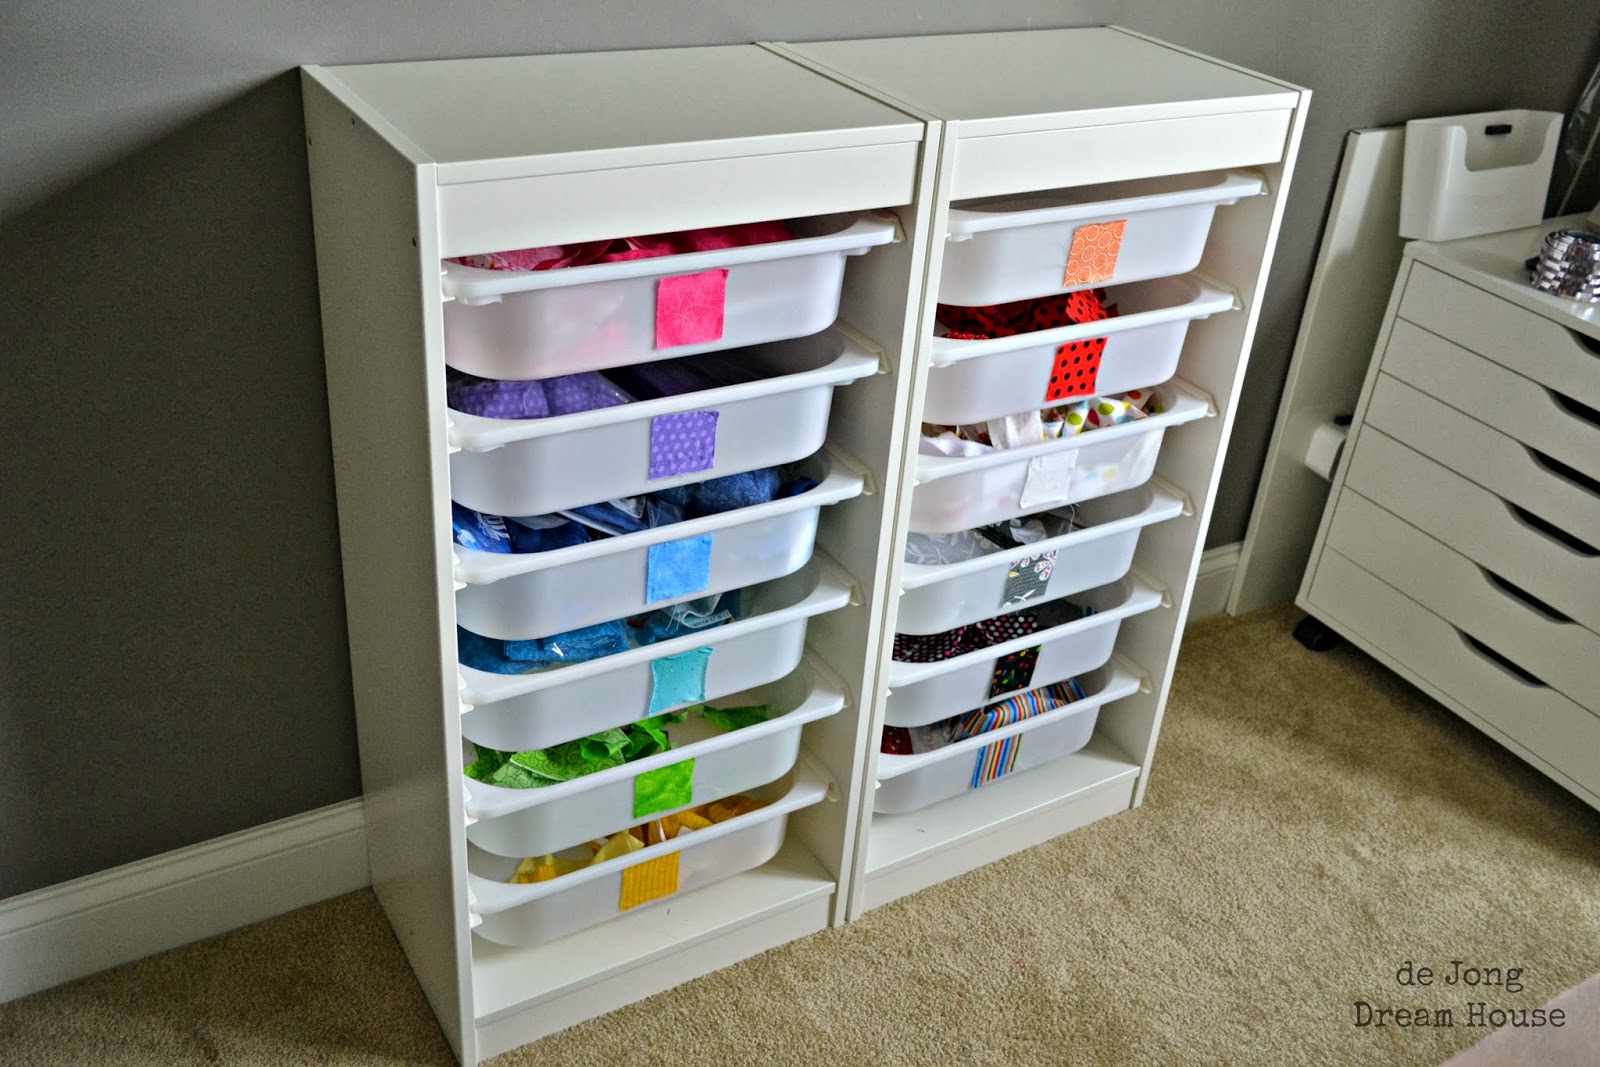 5 home organization ideas to make with your Cricut